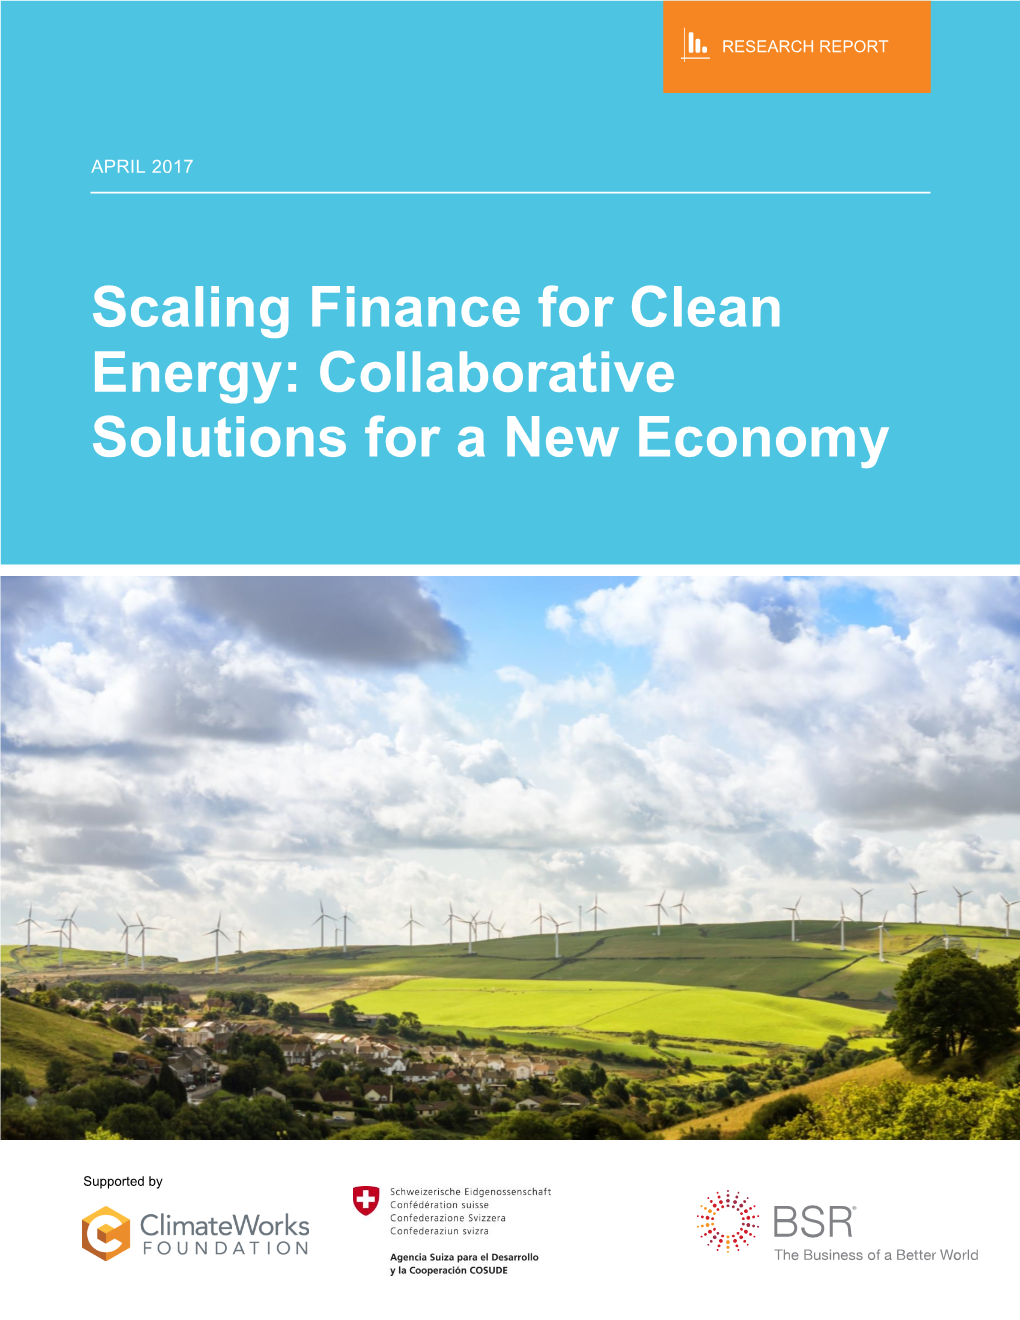 Scaling Finance for Clean Energy: Collaborative Solutions for a New Economy